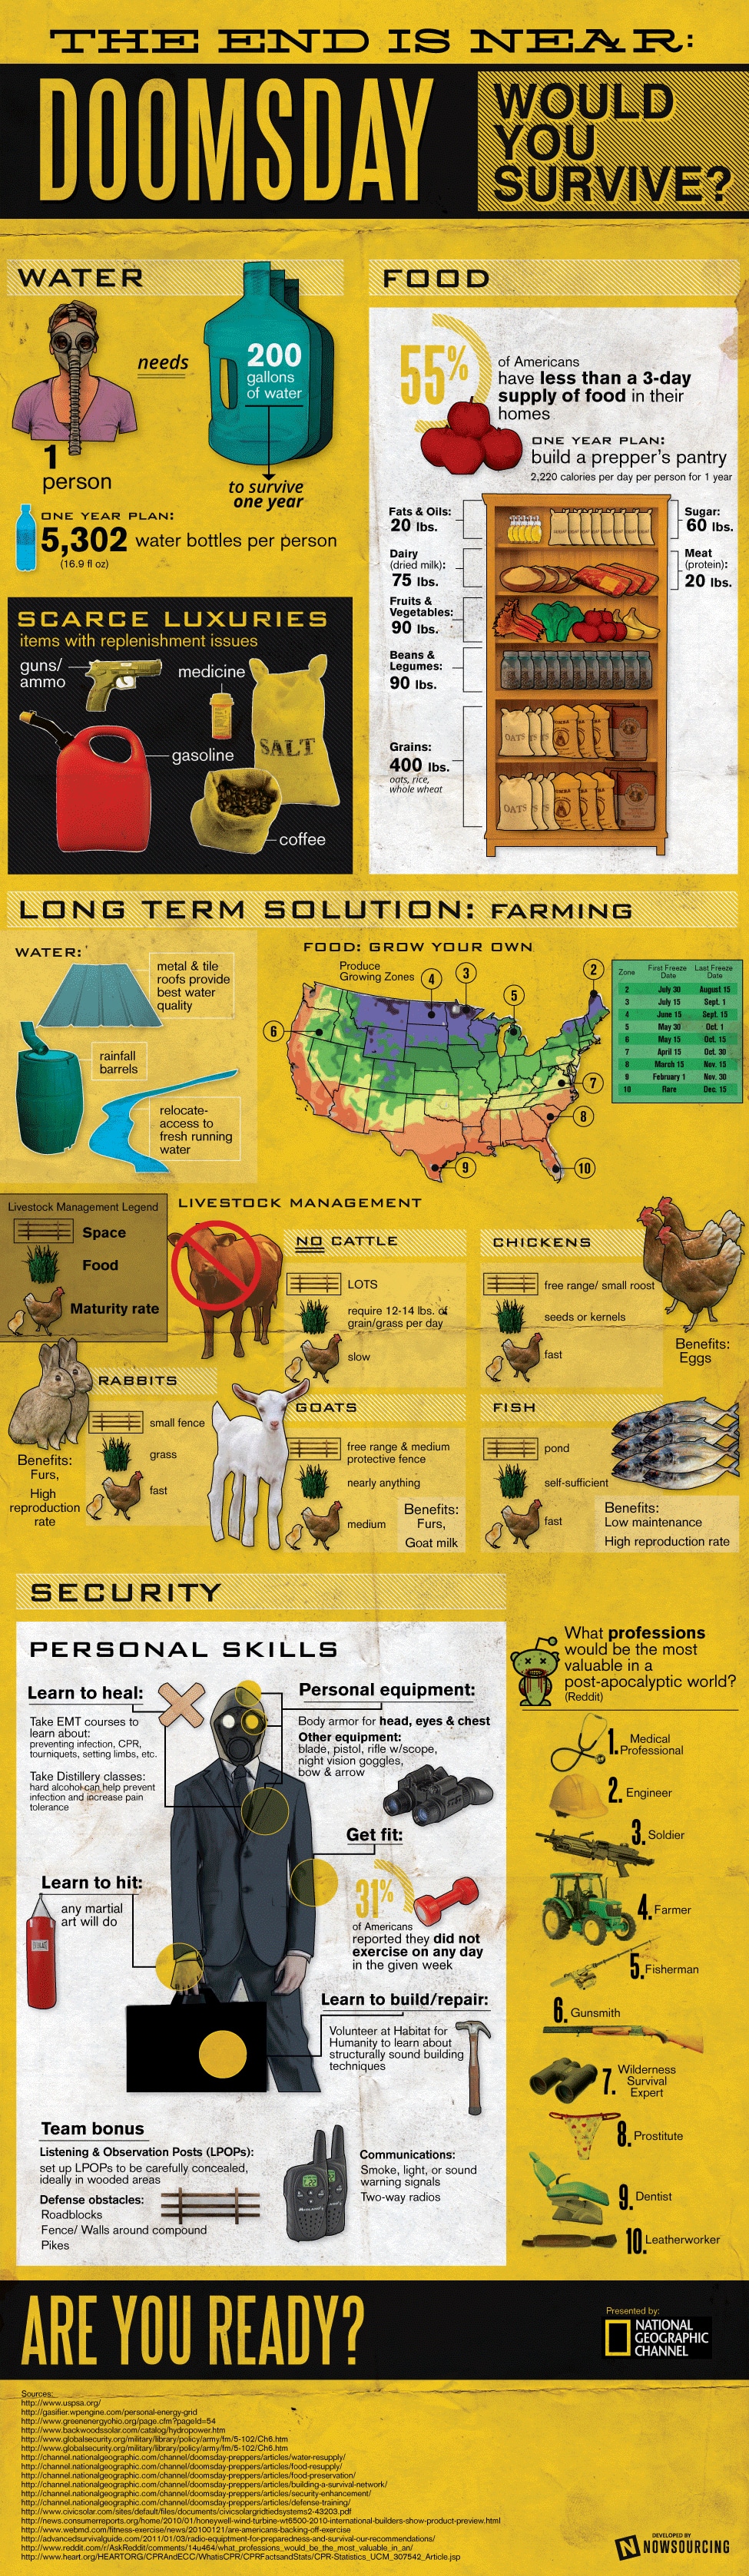 How To: Be A Prepper & Prepare For A Catastrophic Event [Infographic]